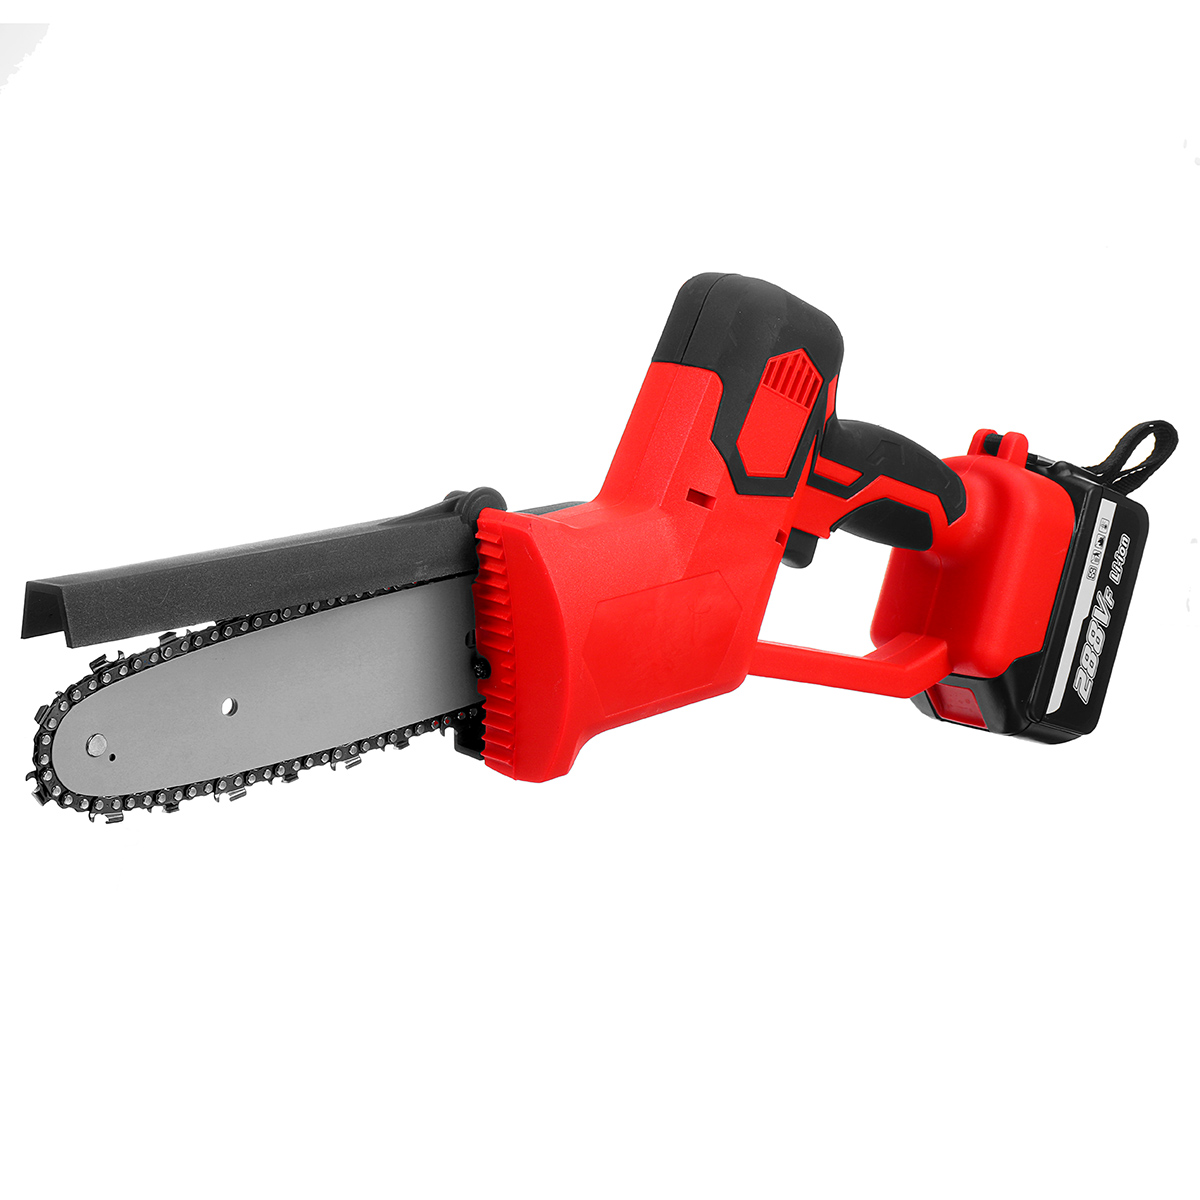 8-Inch-Cordless-Electric-Chain-Saw-288VF--Brushless-Motor-Power-Tools-Chainsaw-1854536-10